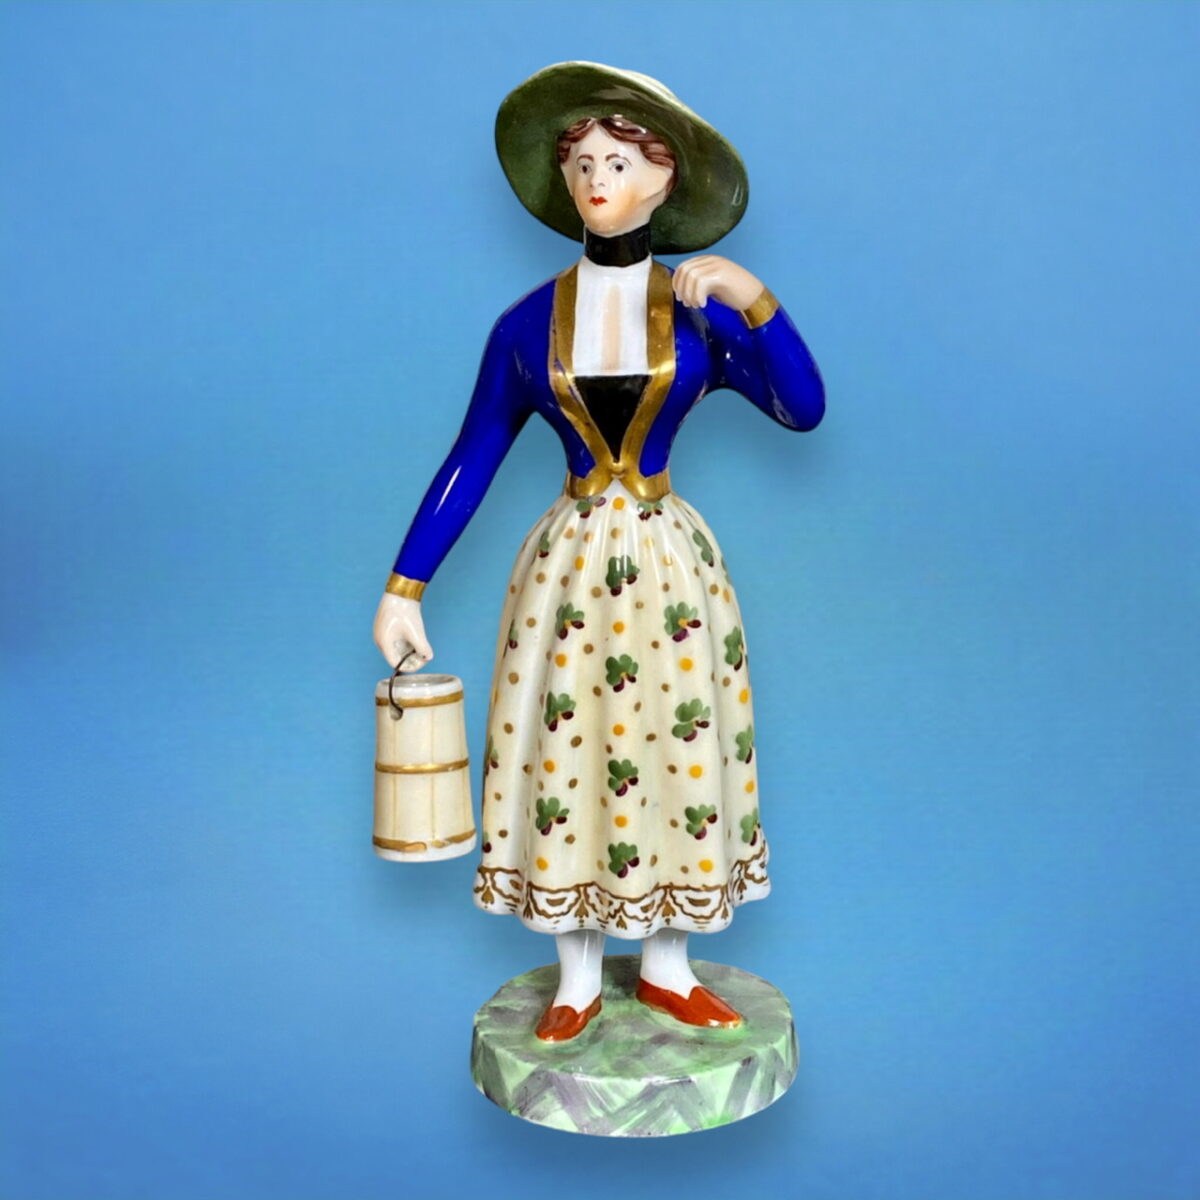 Chamberlains Worcester Porcelain Figure of a Milkmaid.